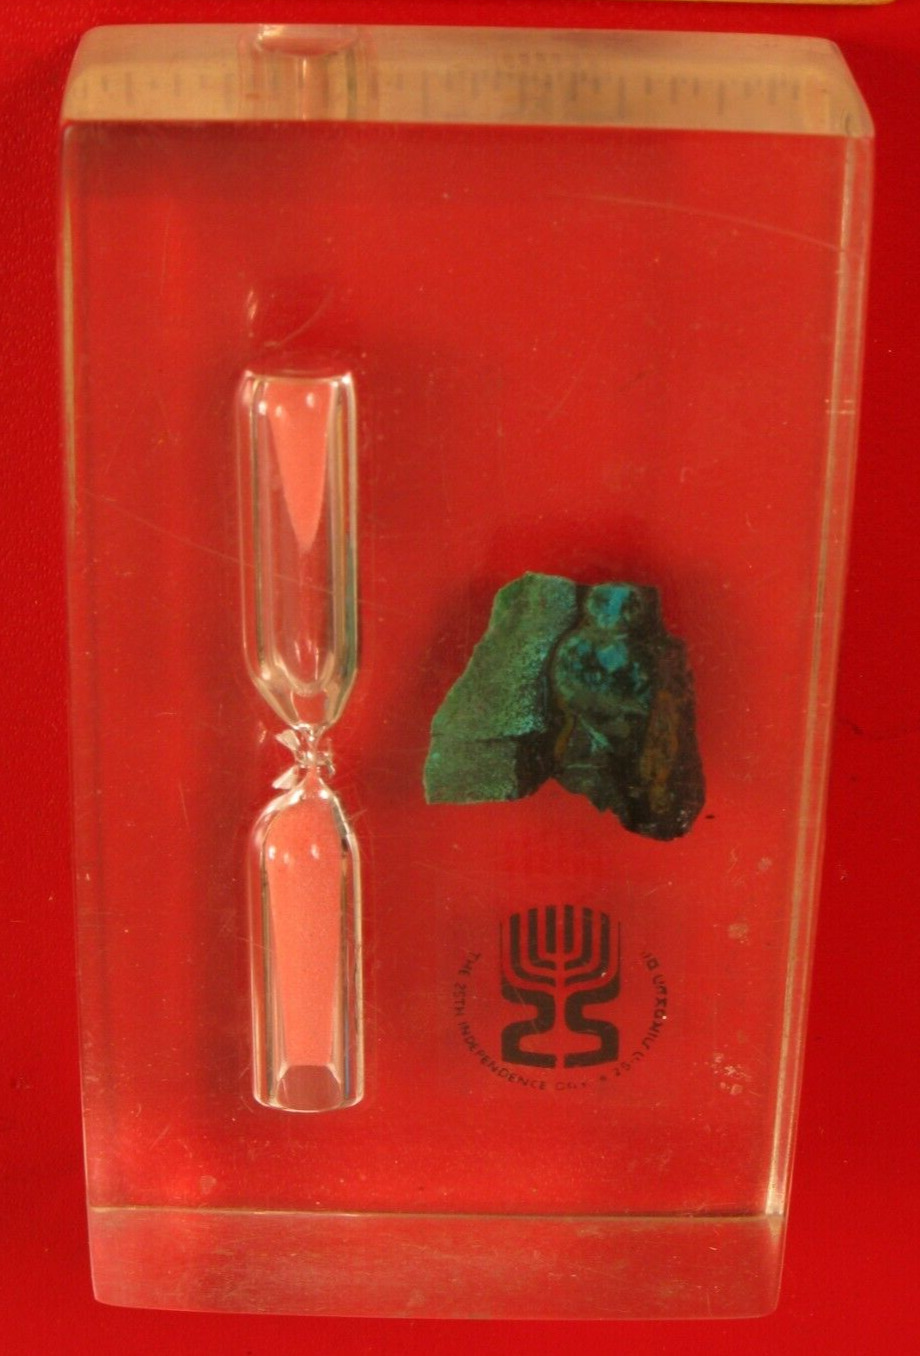 VINTAGE JEWISH HOUR GLASS MARKING 25TH INDEPENDENCE DAY ANNIVERSARY IN LUCITE 